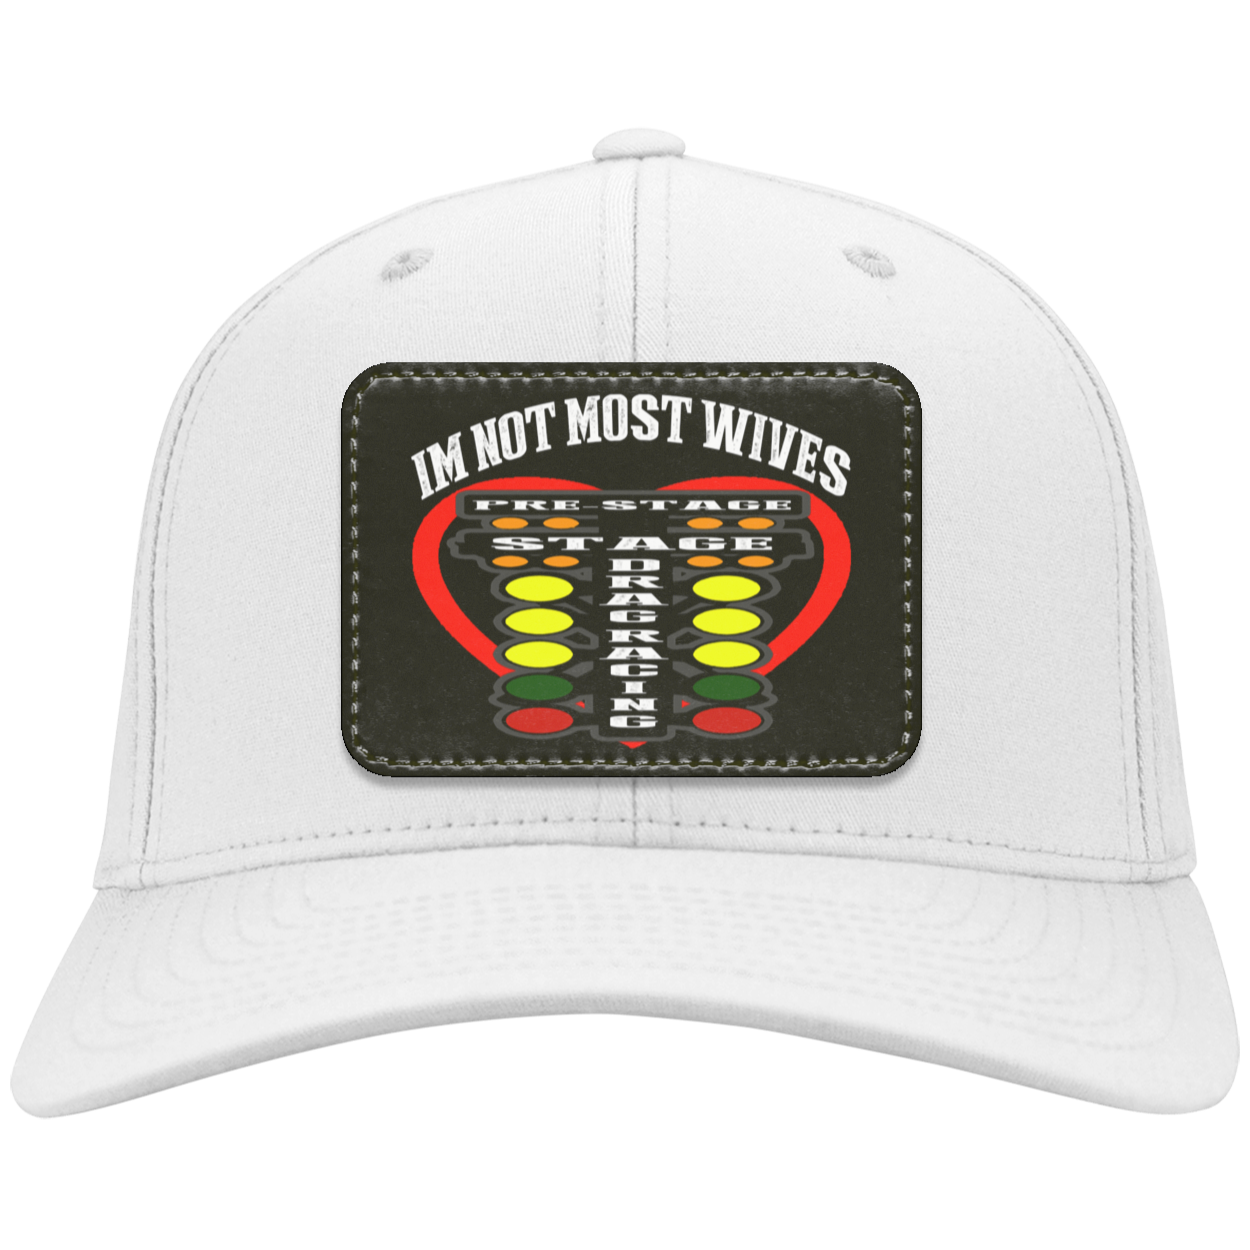 I'm Not Most Wives Drag Racing Twill Cap - Patch